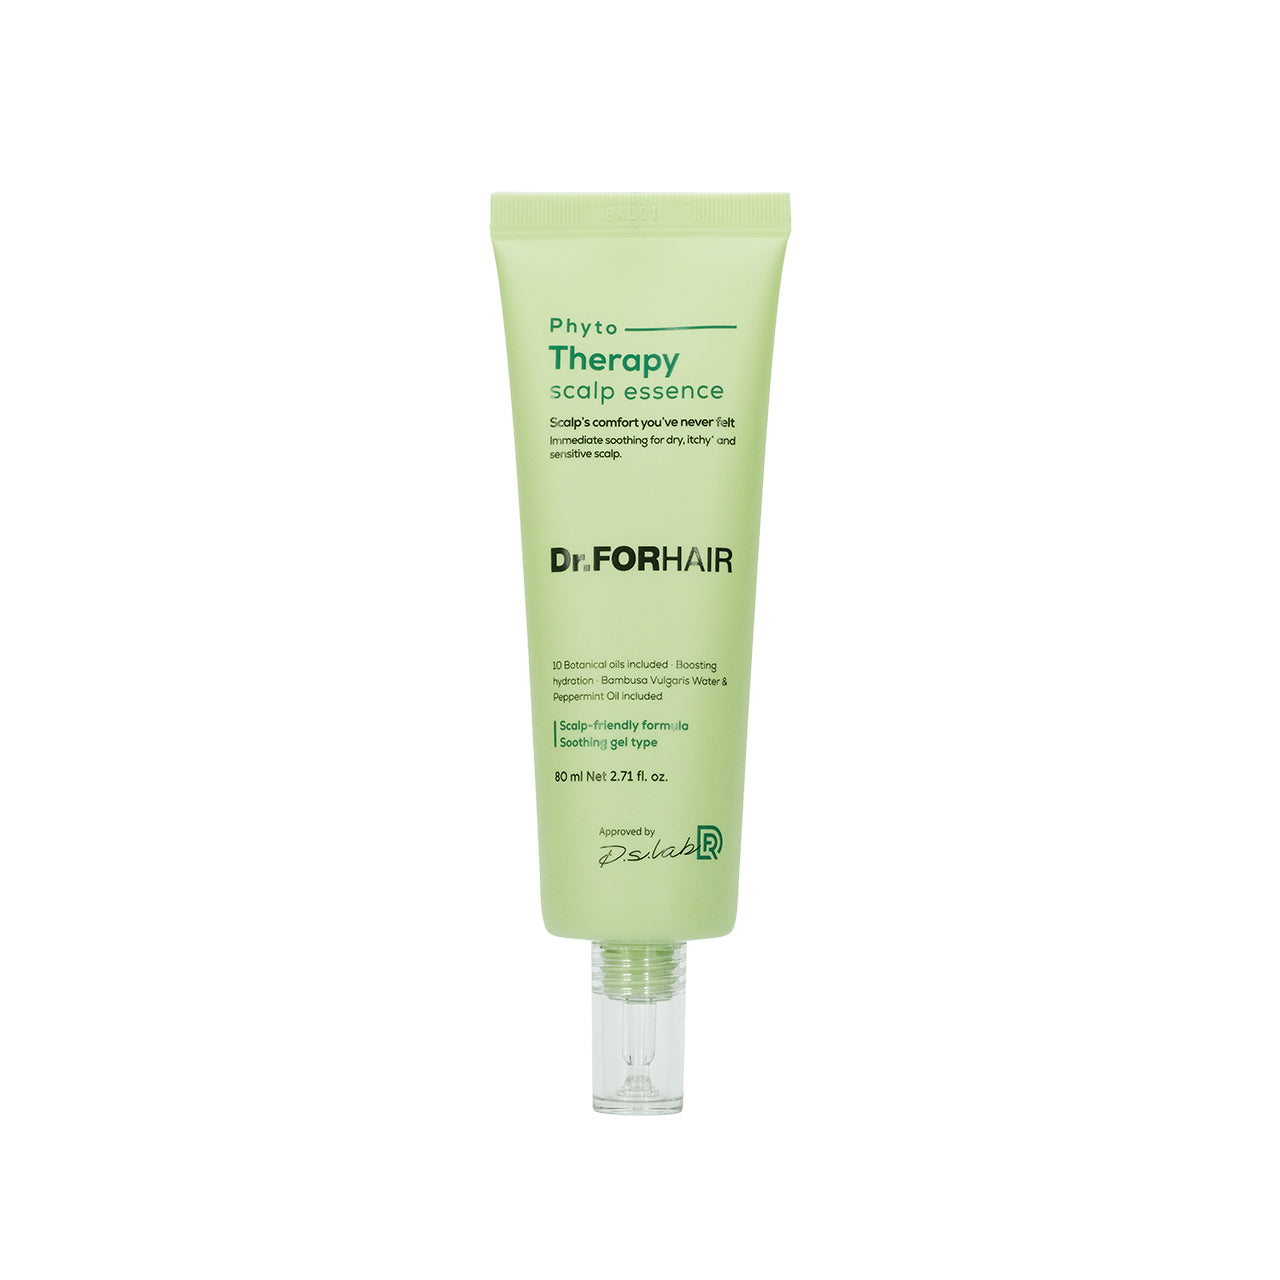 Dr. ForHair Phyto Therapy Scalp Essence 80ml